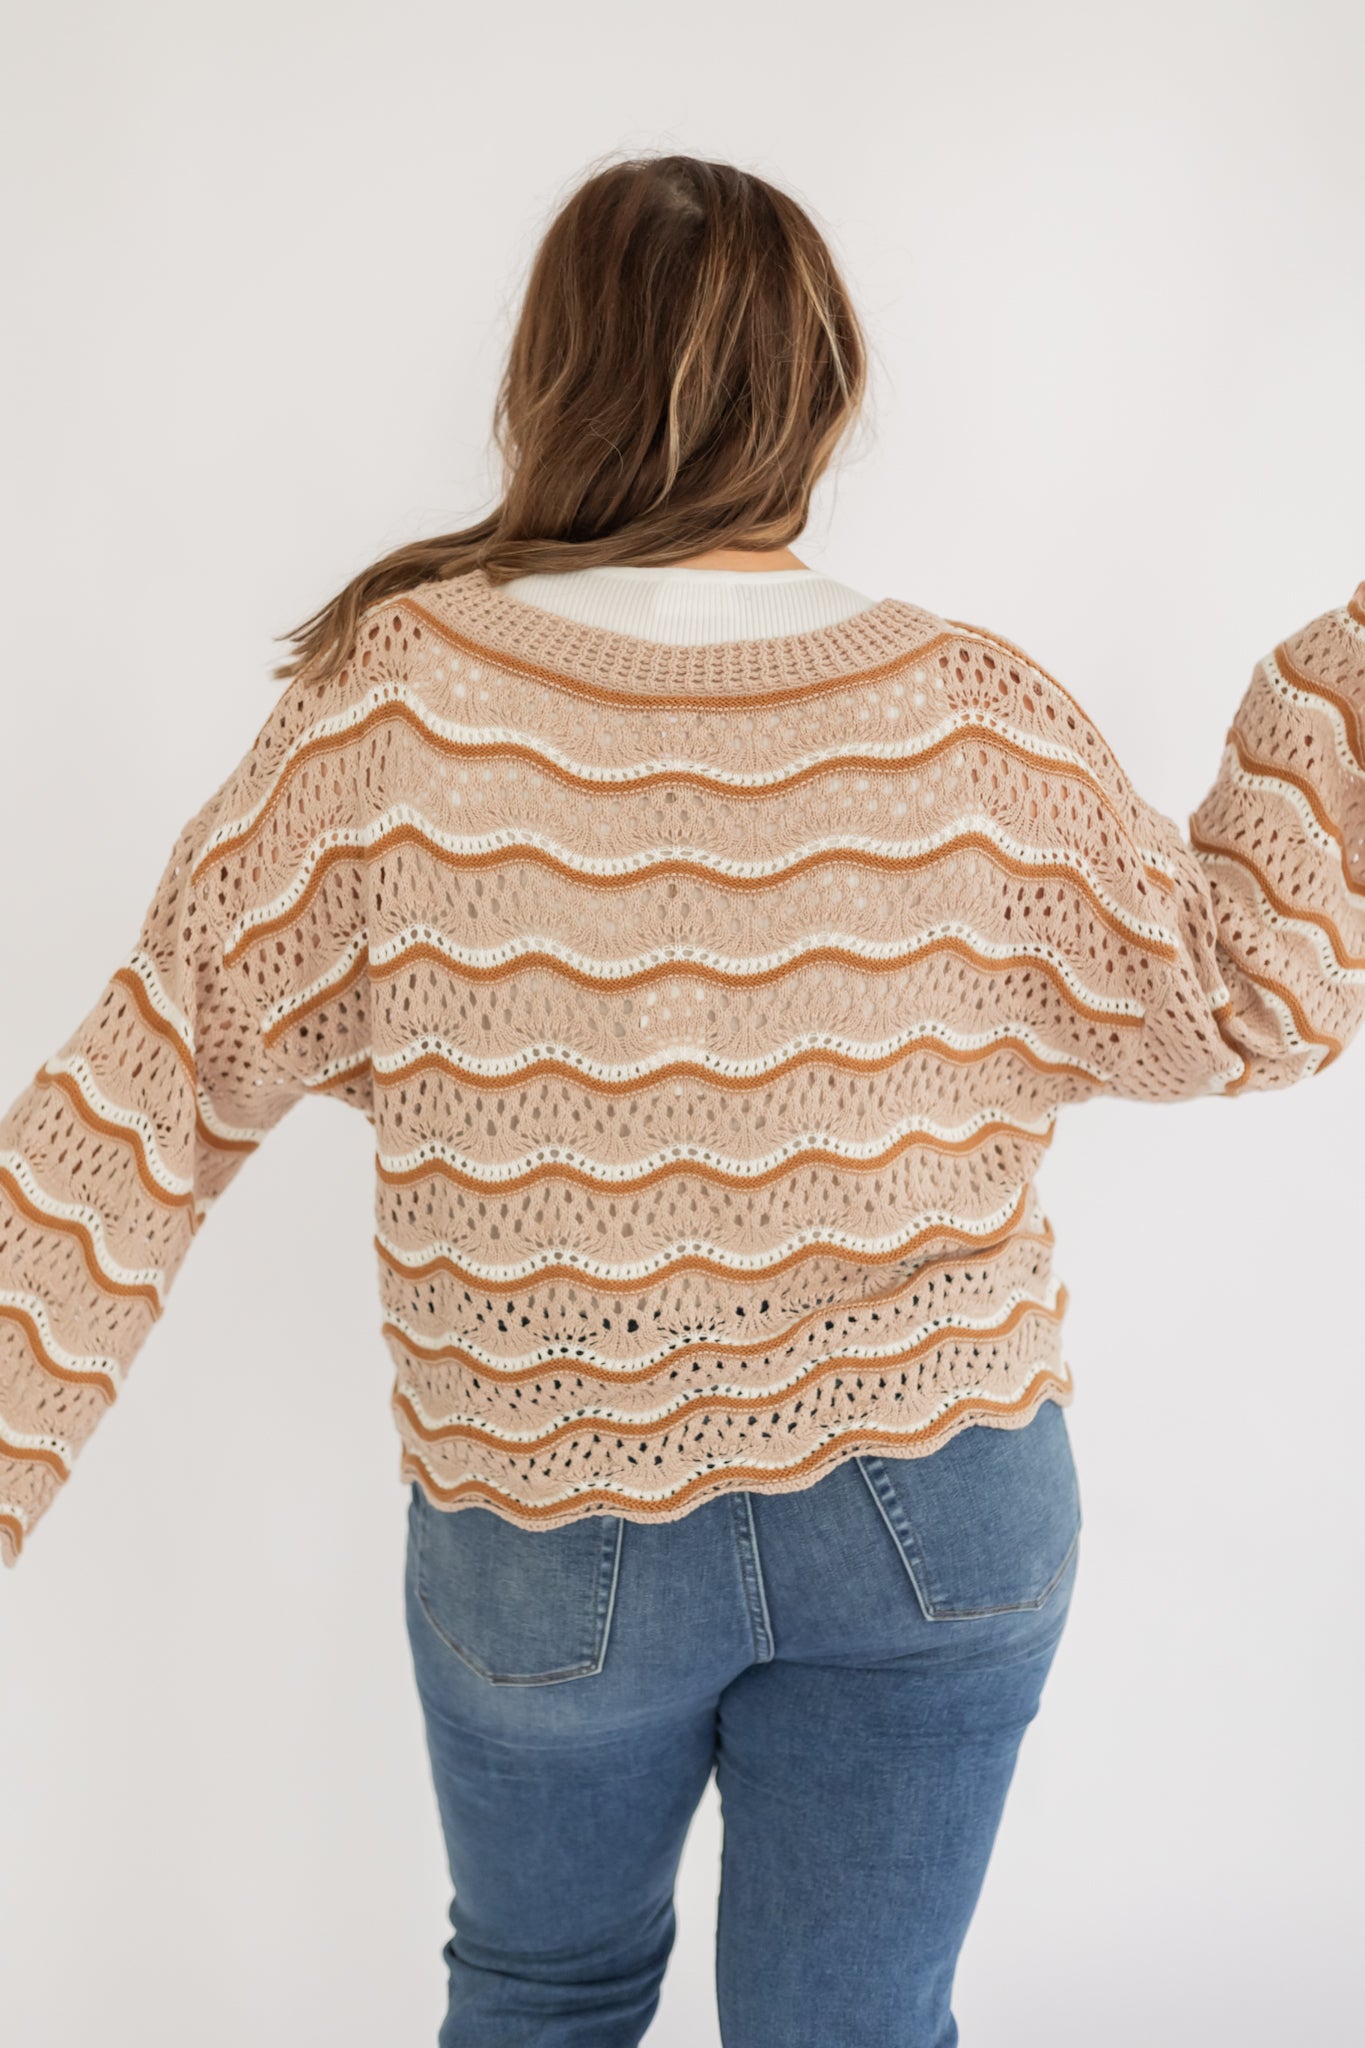 LAYER ME UP CROCHET SWEATER